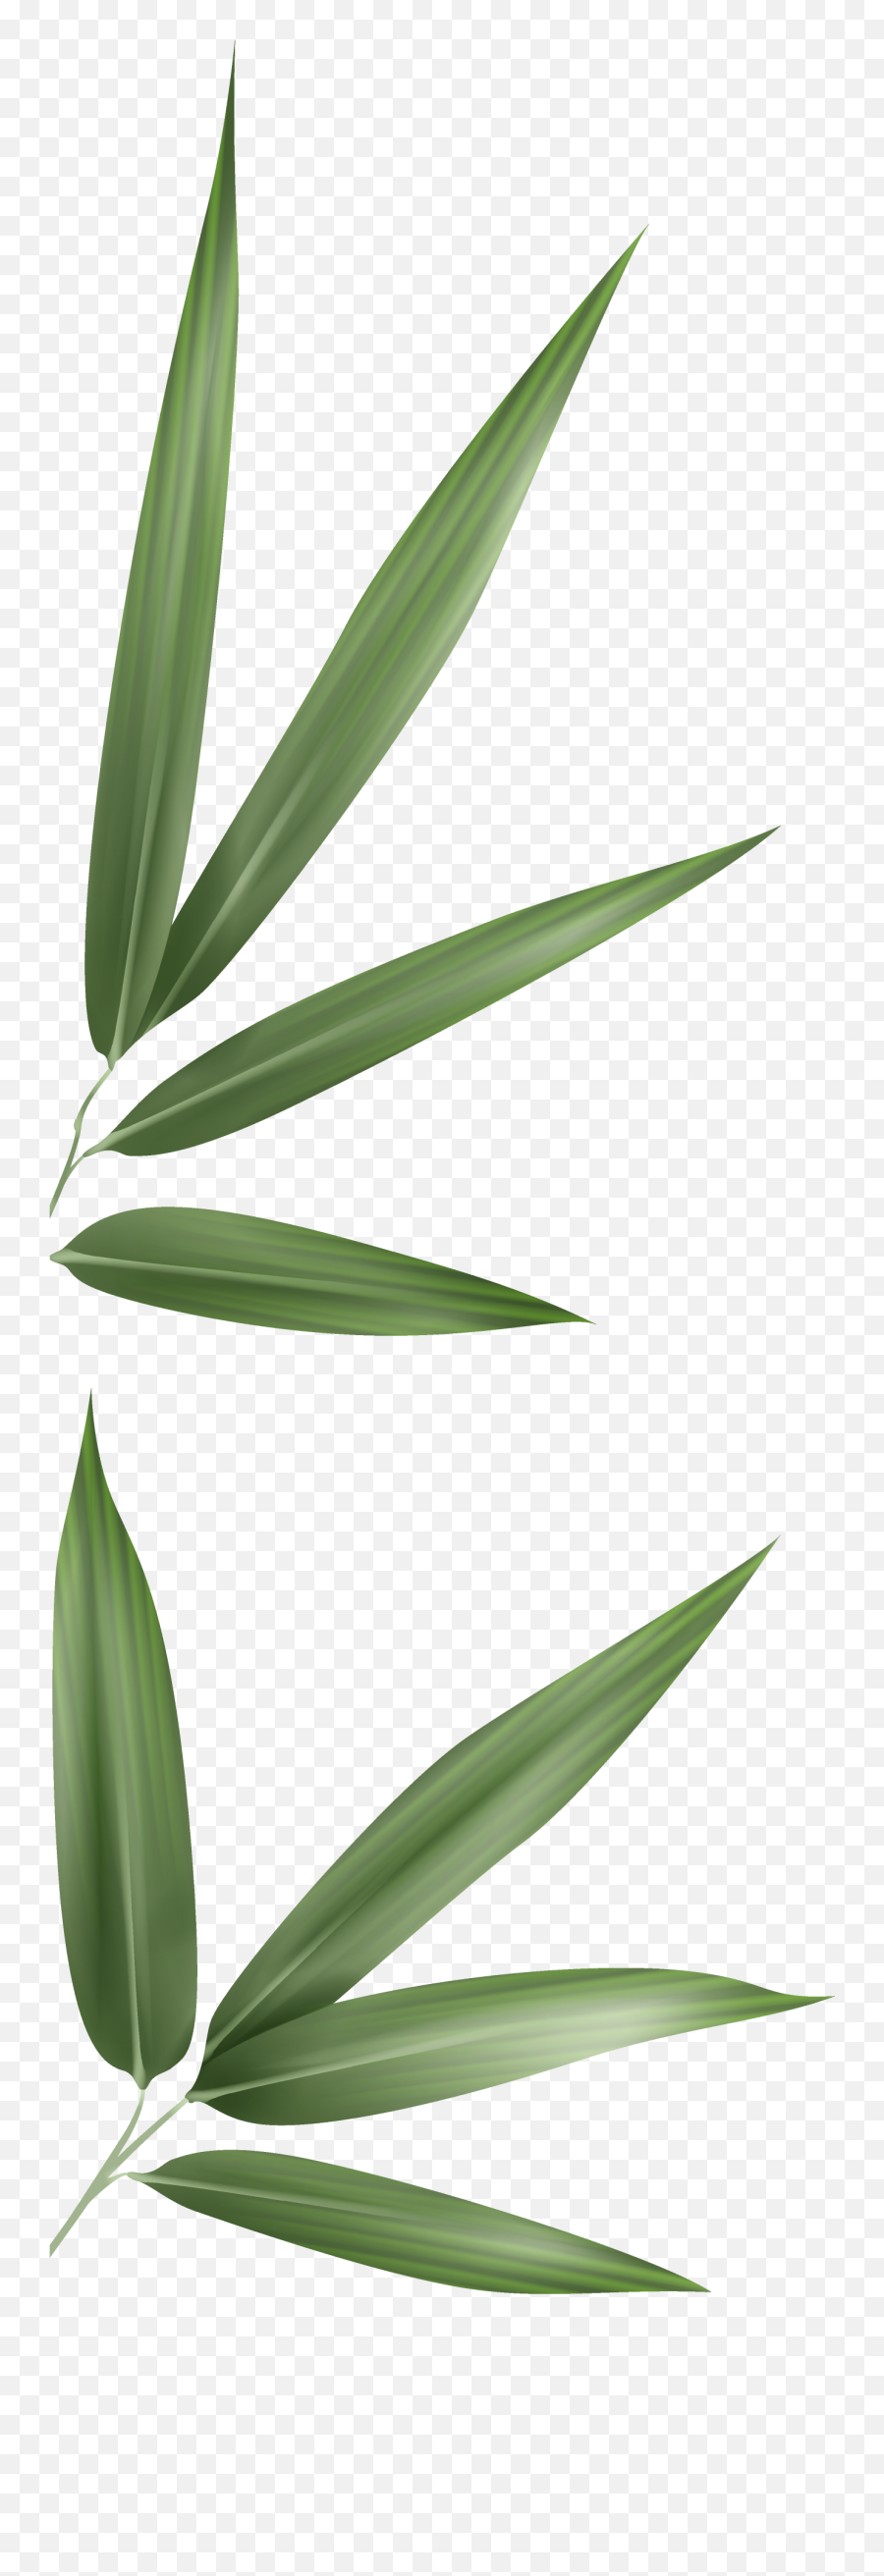 Are You Alright Mental Health Check During A Covid - 19 Emoji,Bamboo Leaves Png